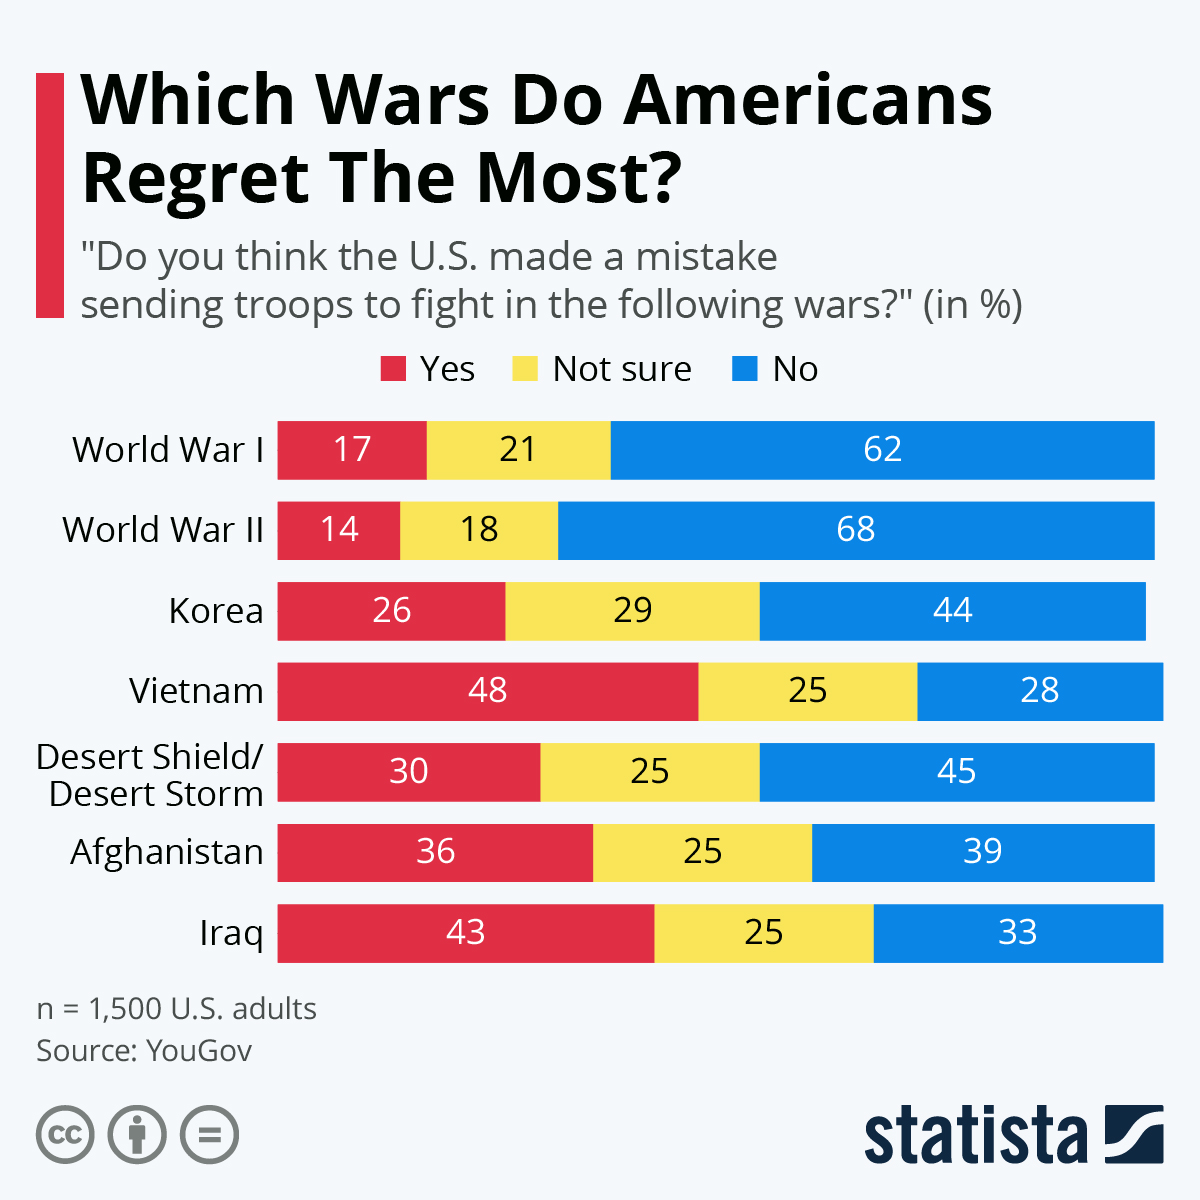 Which Wars Do Americans Most Regret?